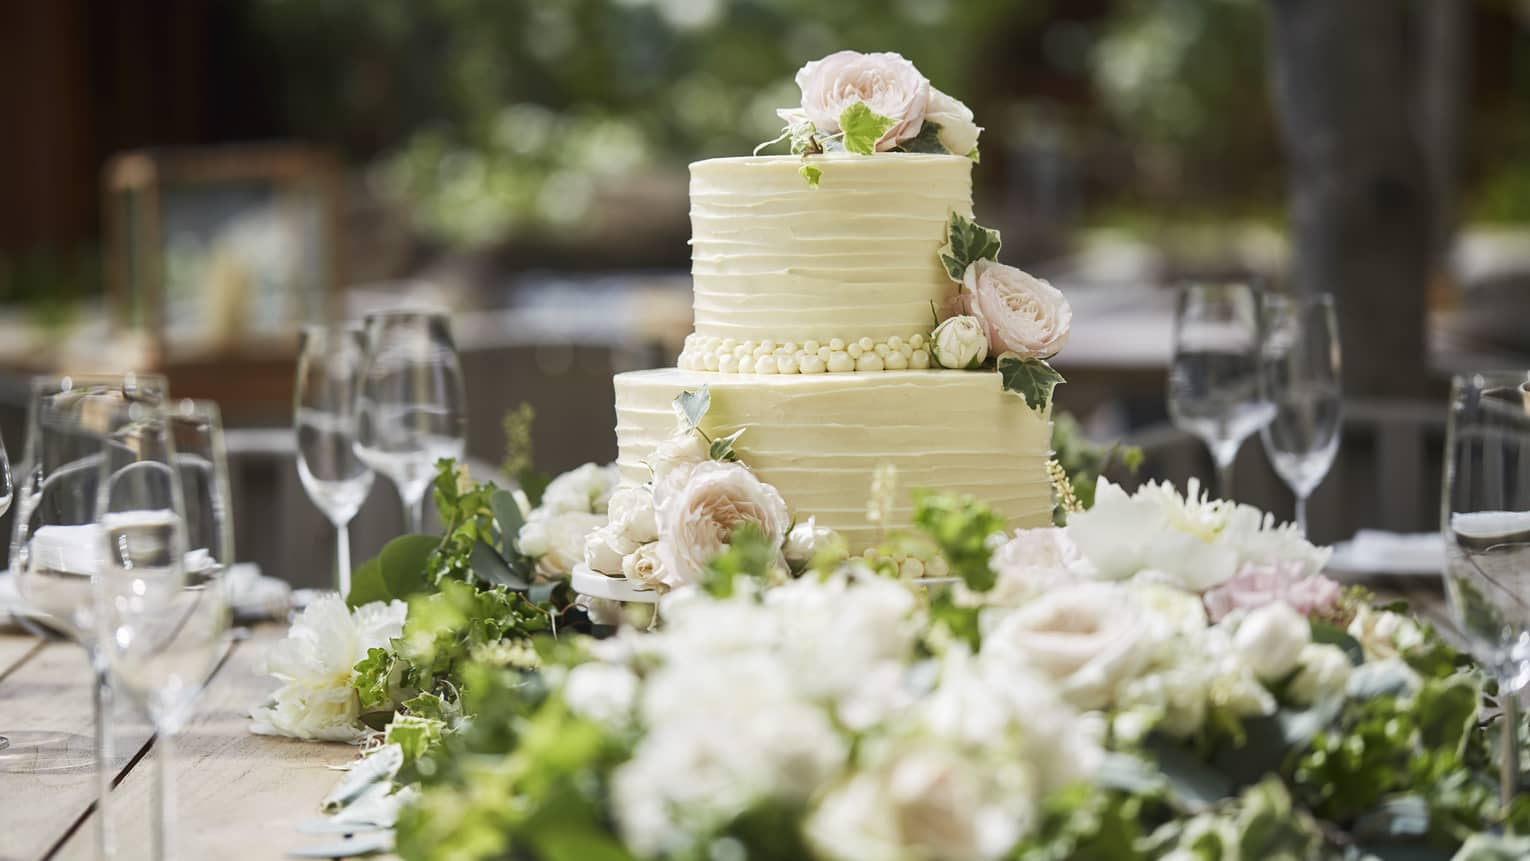 Two-tiered white wedding cake on banquet table with wine glasses, flowers